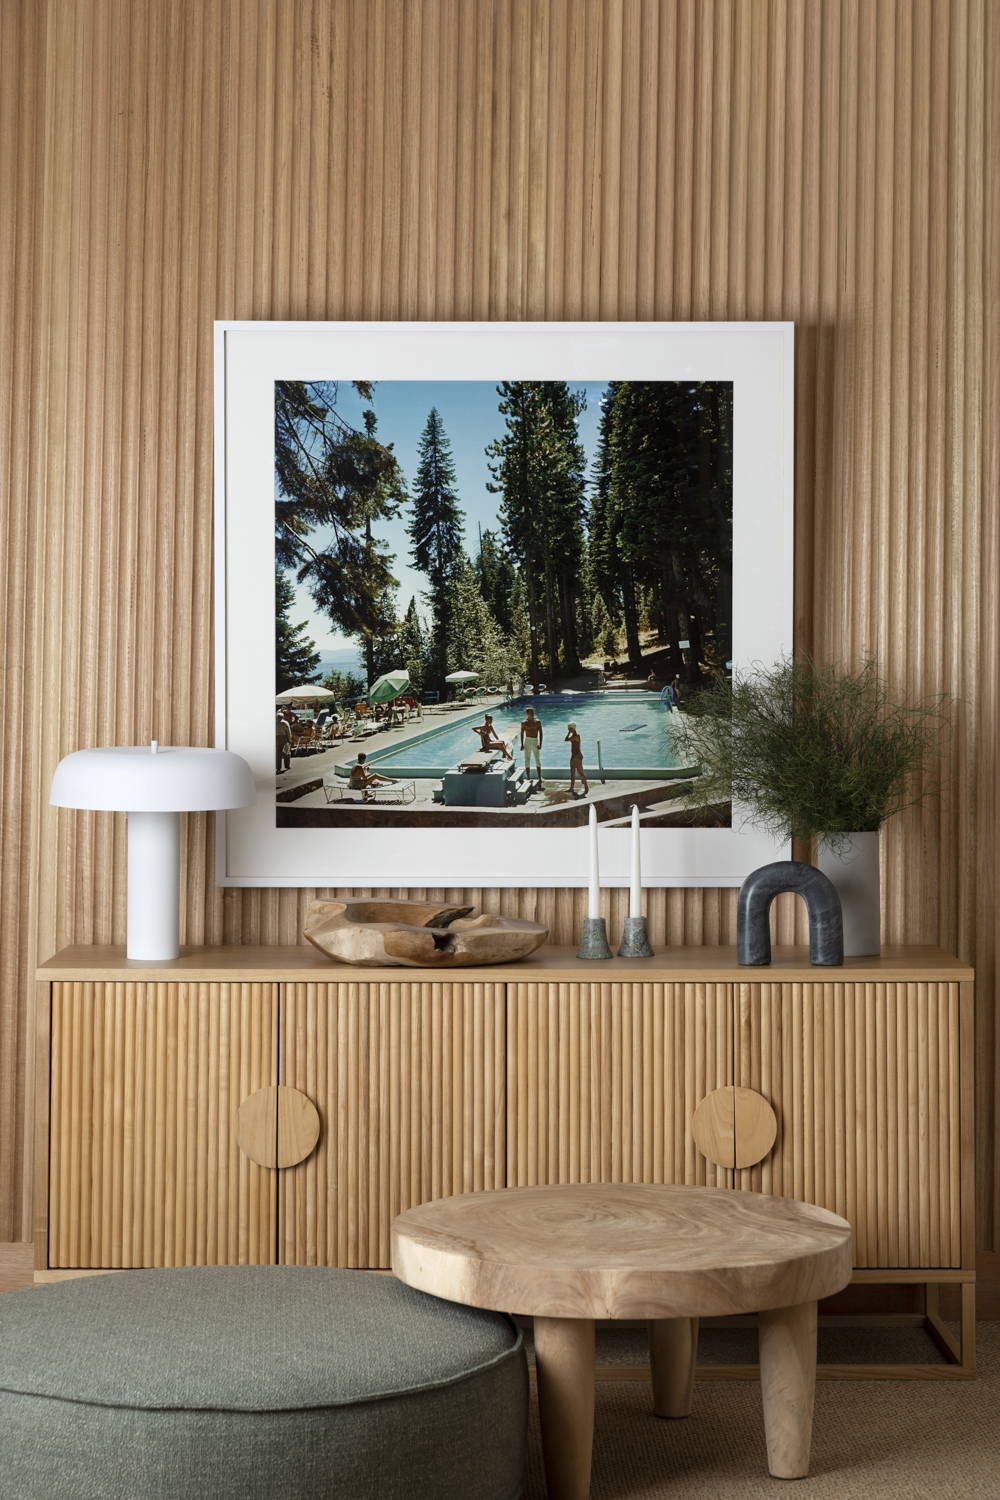 Pool at Lake Tahoe by Slim Aarons - A vintage photograph  by Slim Aarons styled in an earthy interior.